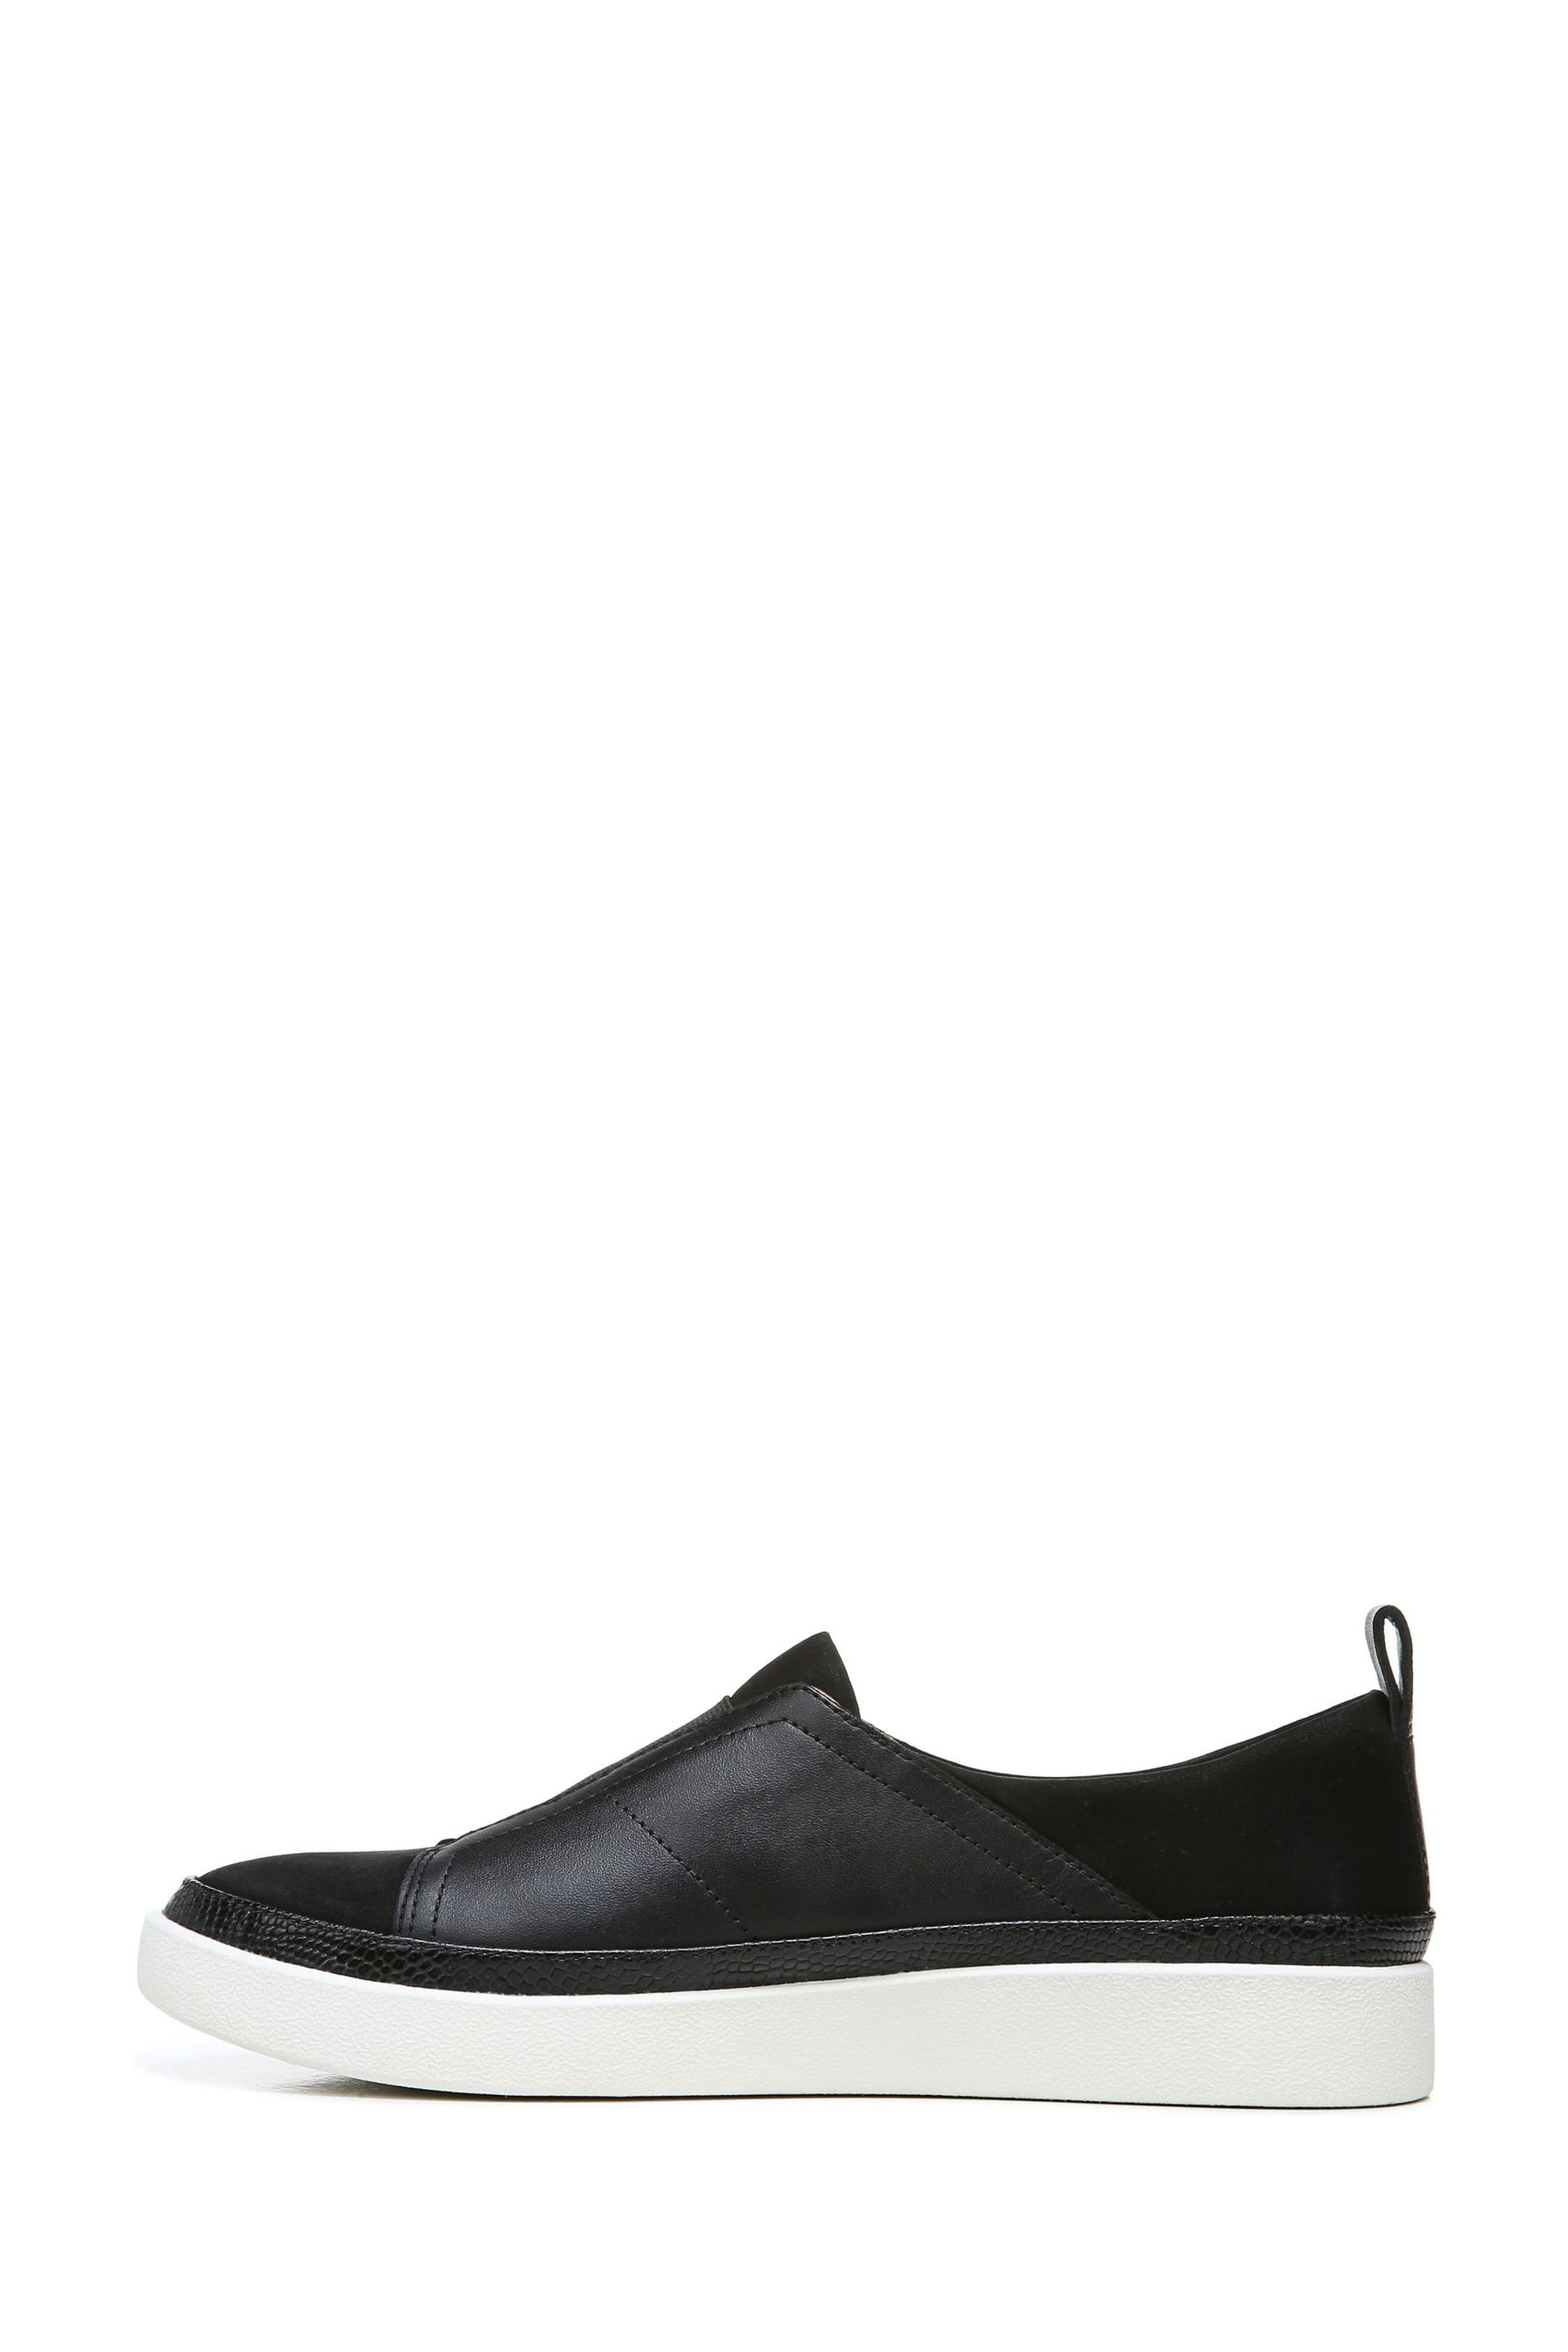 Buy Vionic Zinah Leather Black Slip-ons from the Next UK online shop